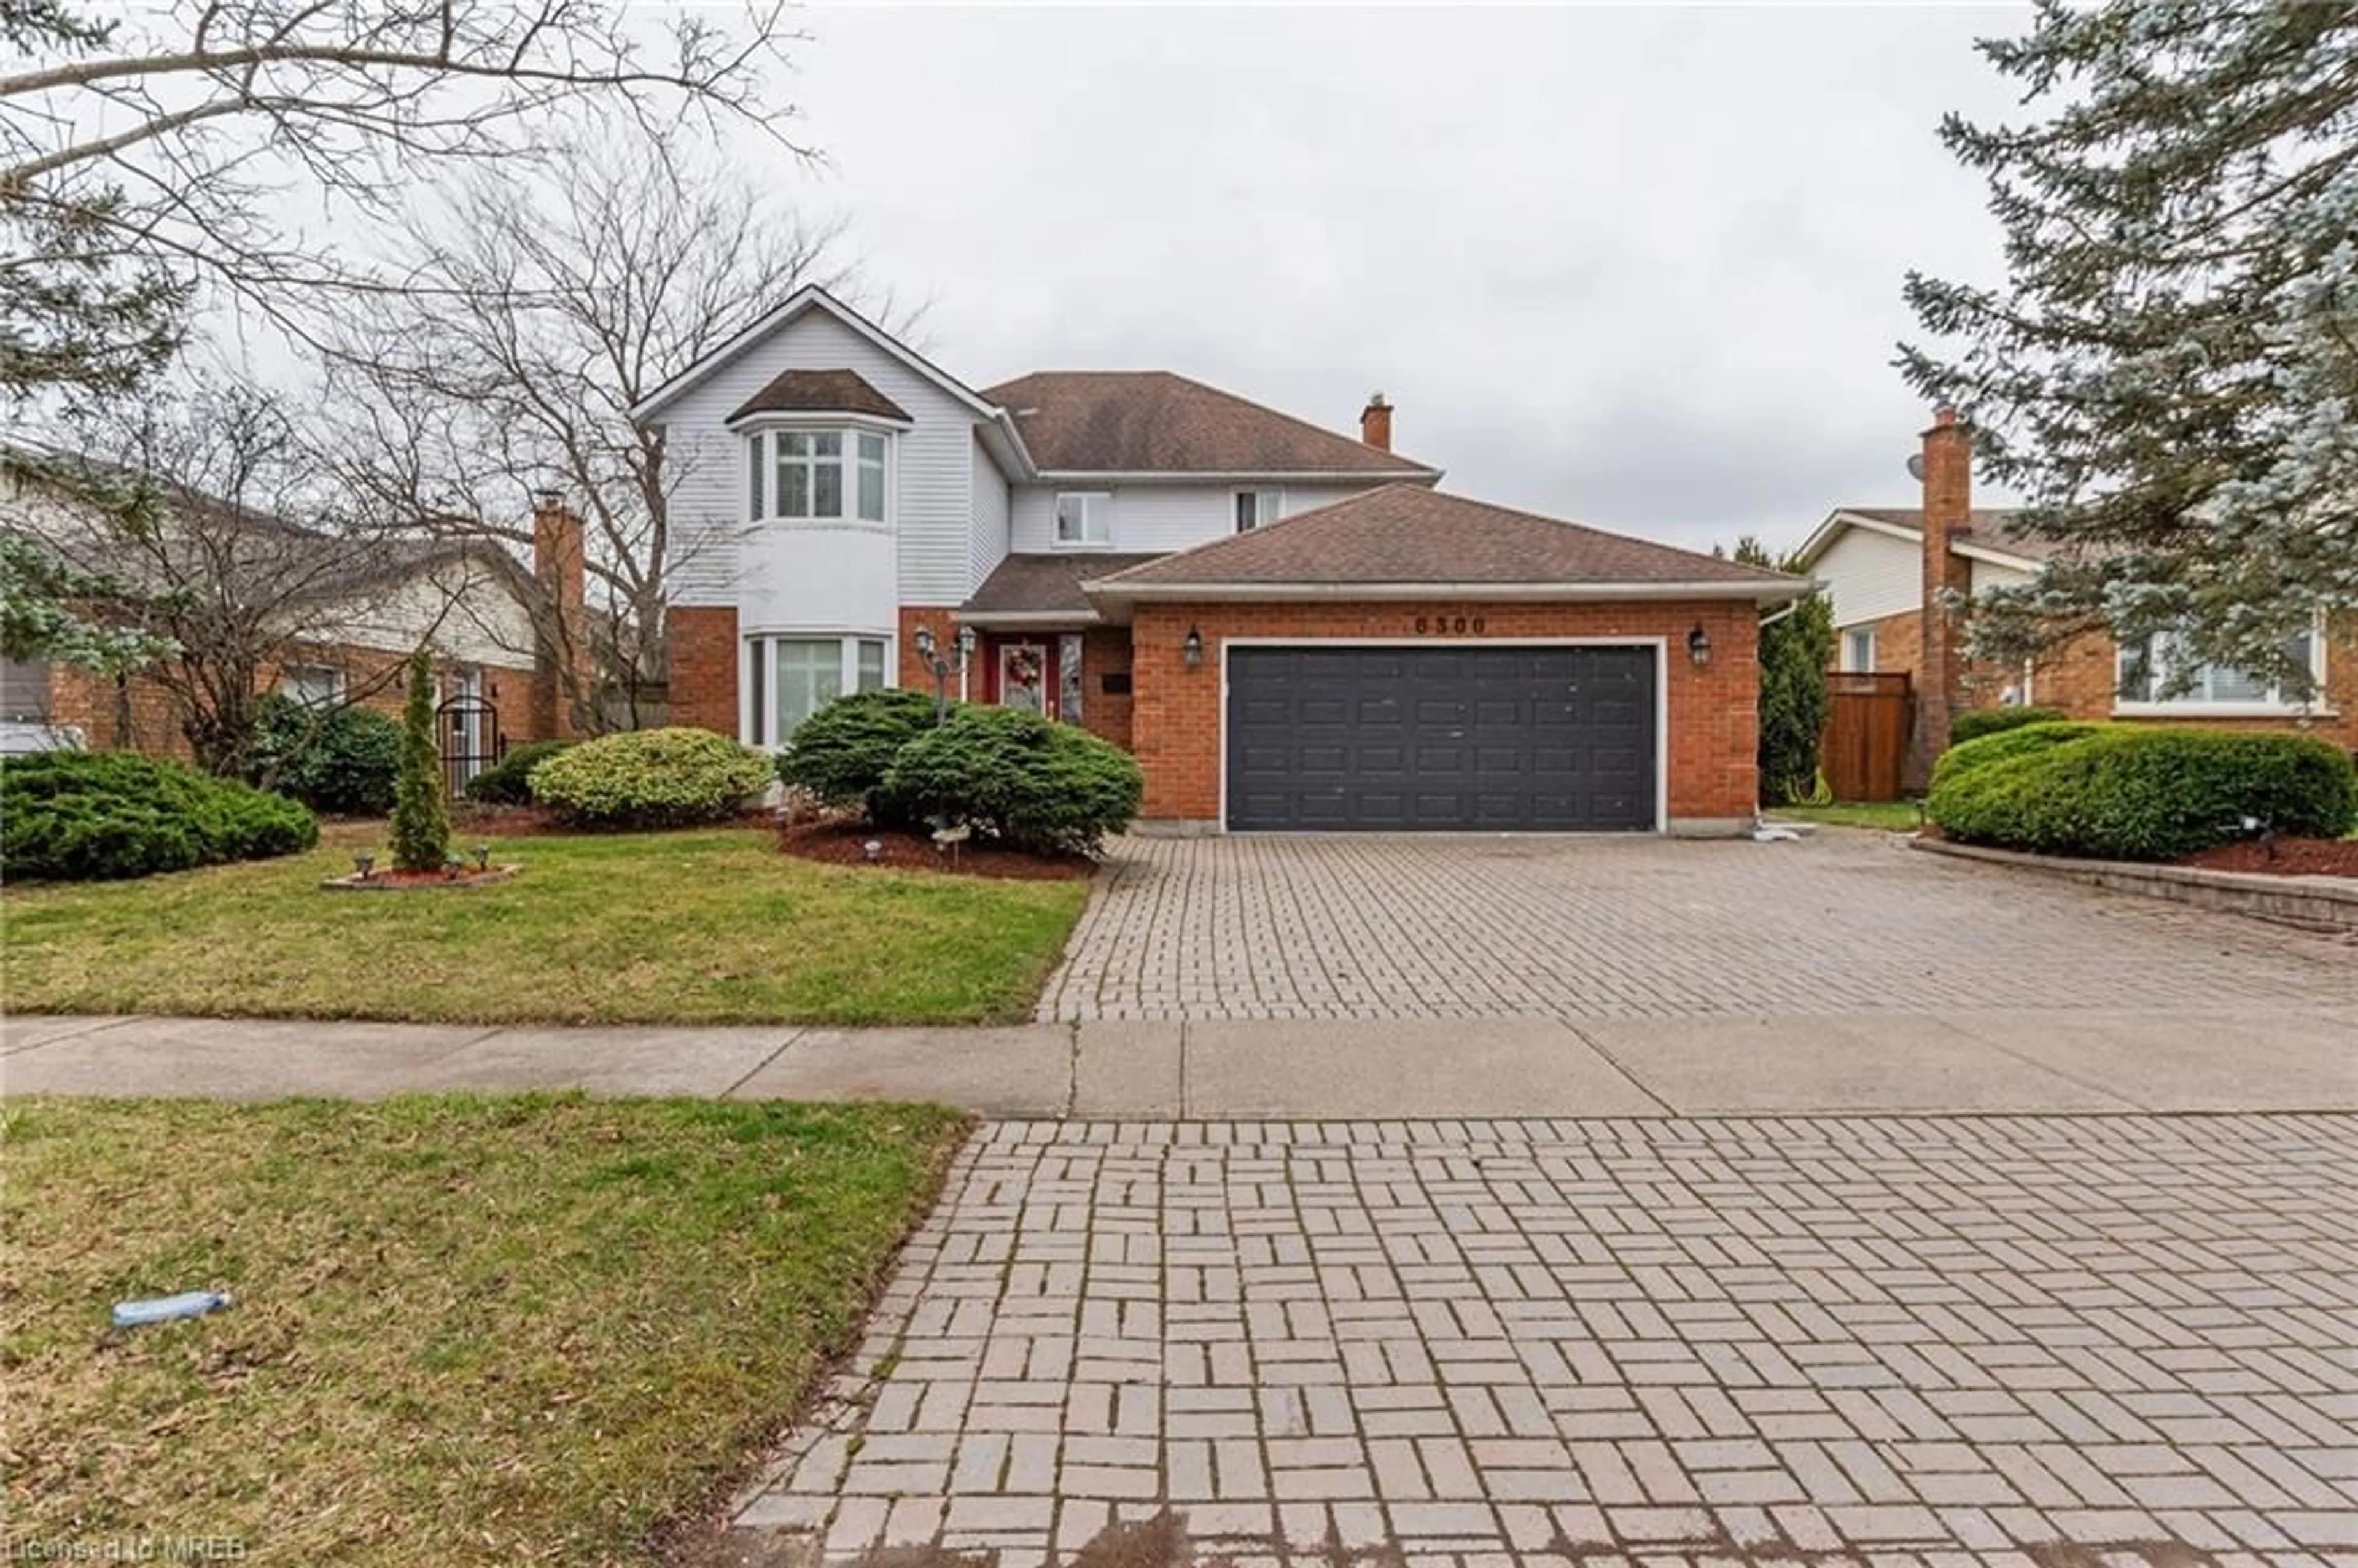 Frontside or backside of a home for 6300 Giovina Dr, Niagara Falls Ontario L2J 4H2